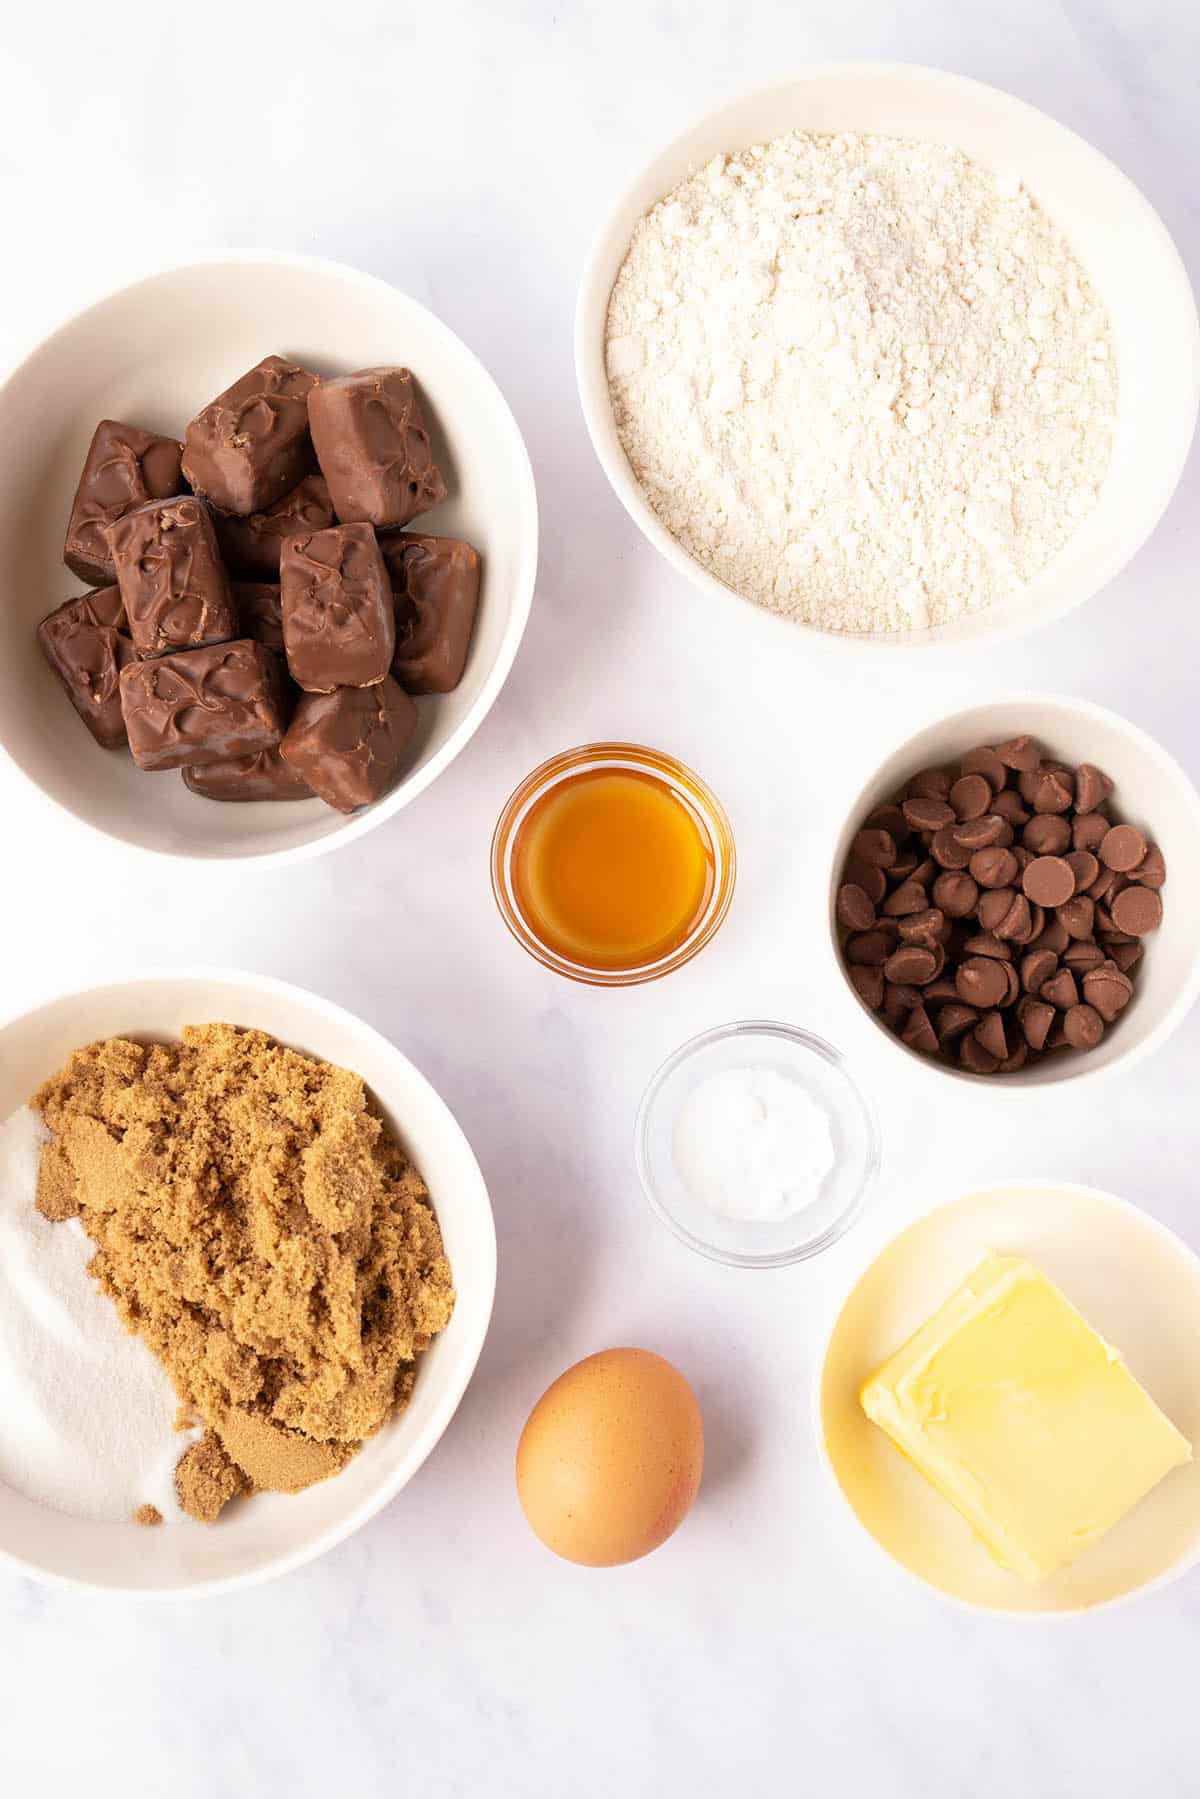 All the ingredients needed to make Snickers Cookies from scratch. 